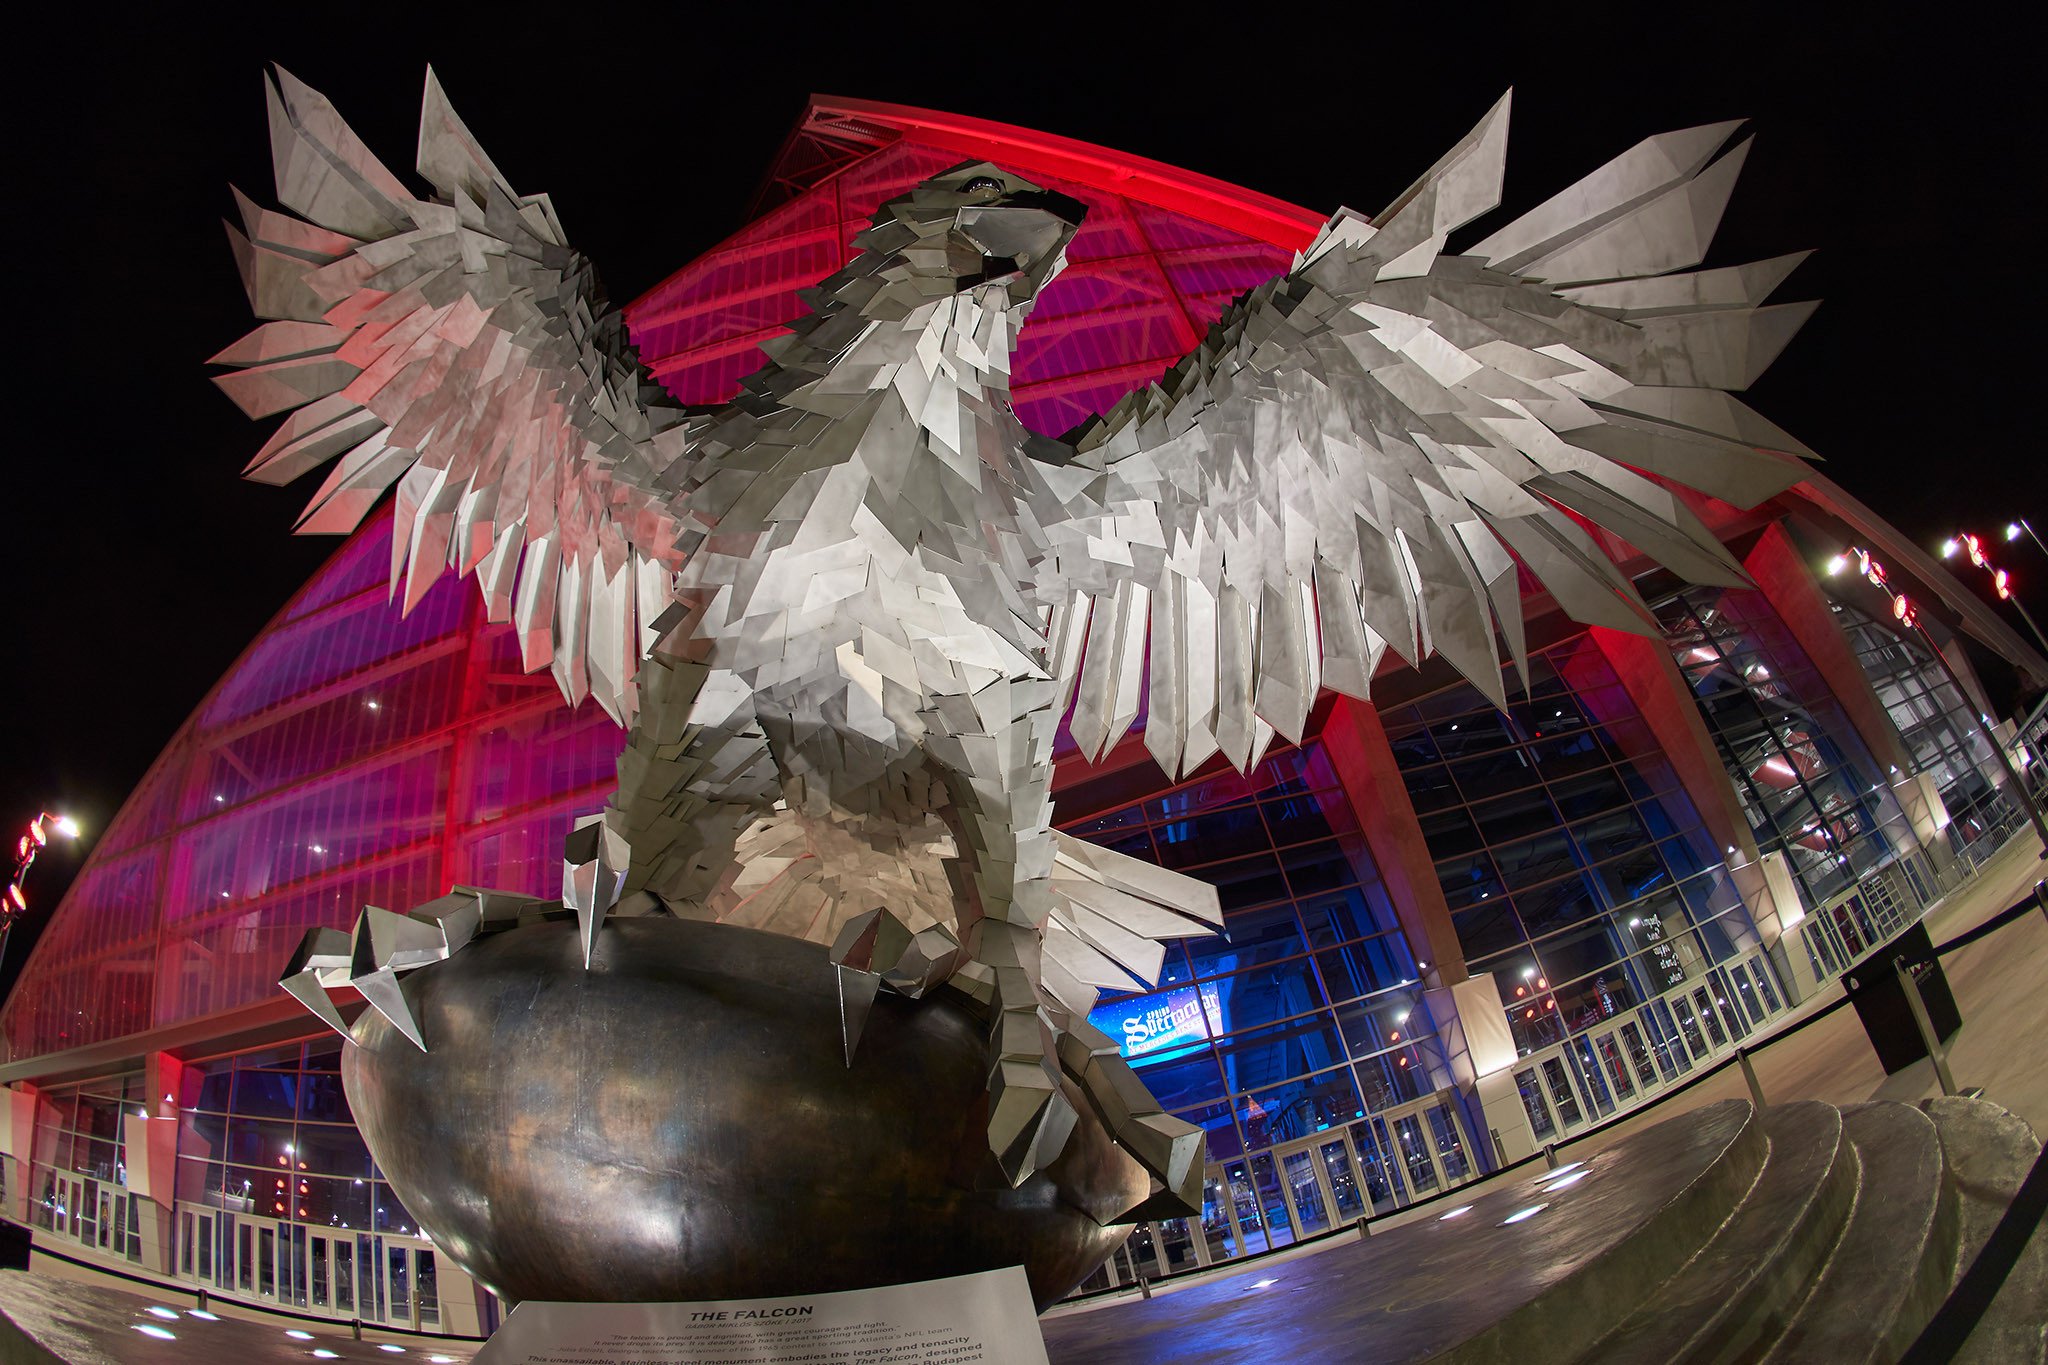 Steel falcon sculpture outside the entrance of the stadium